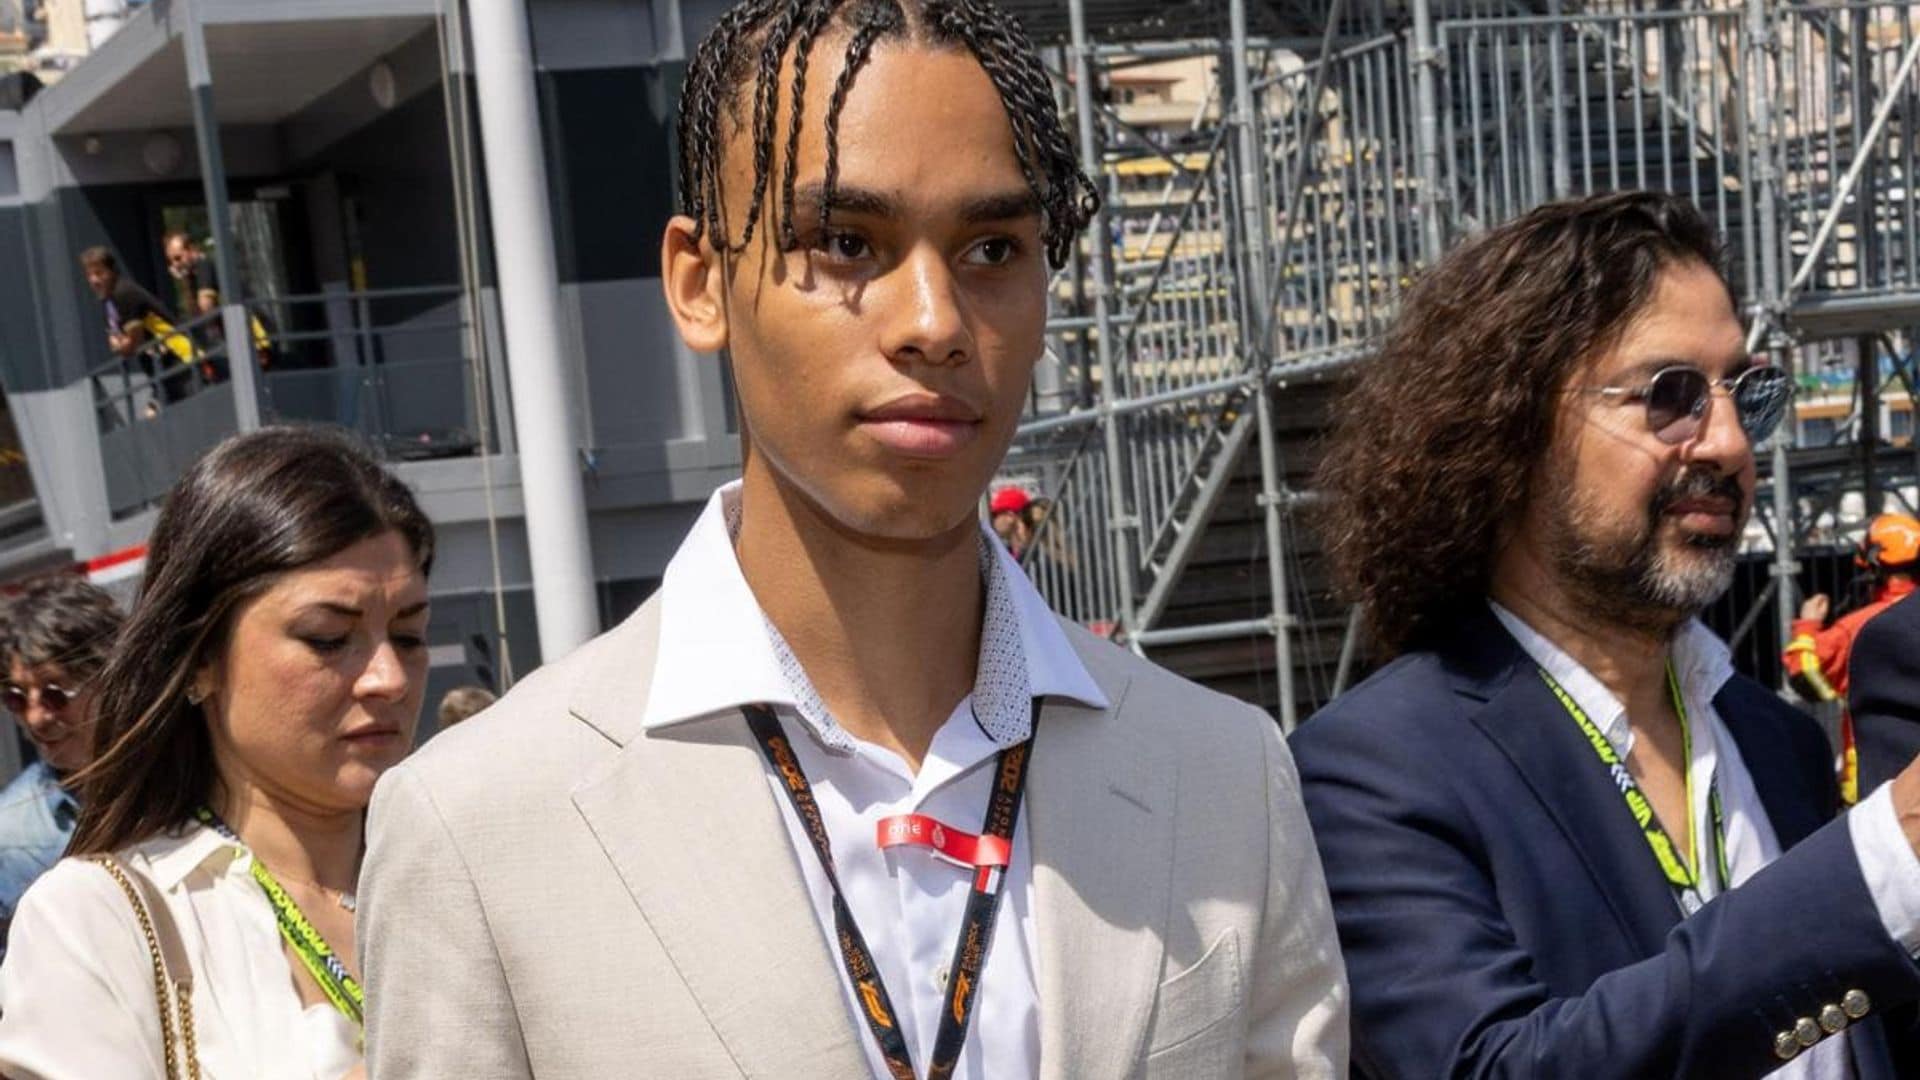 Prince Albert's son Alexandre makes appearance at Monaco Grand Prix with family member